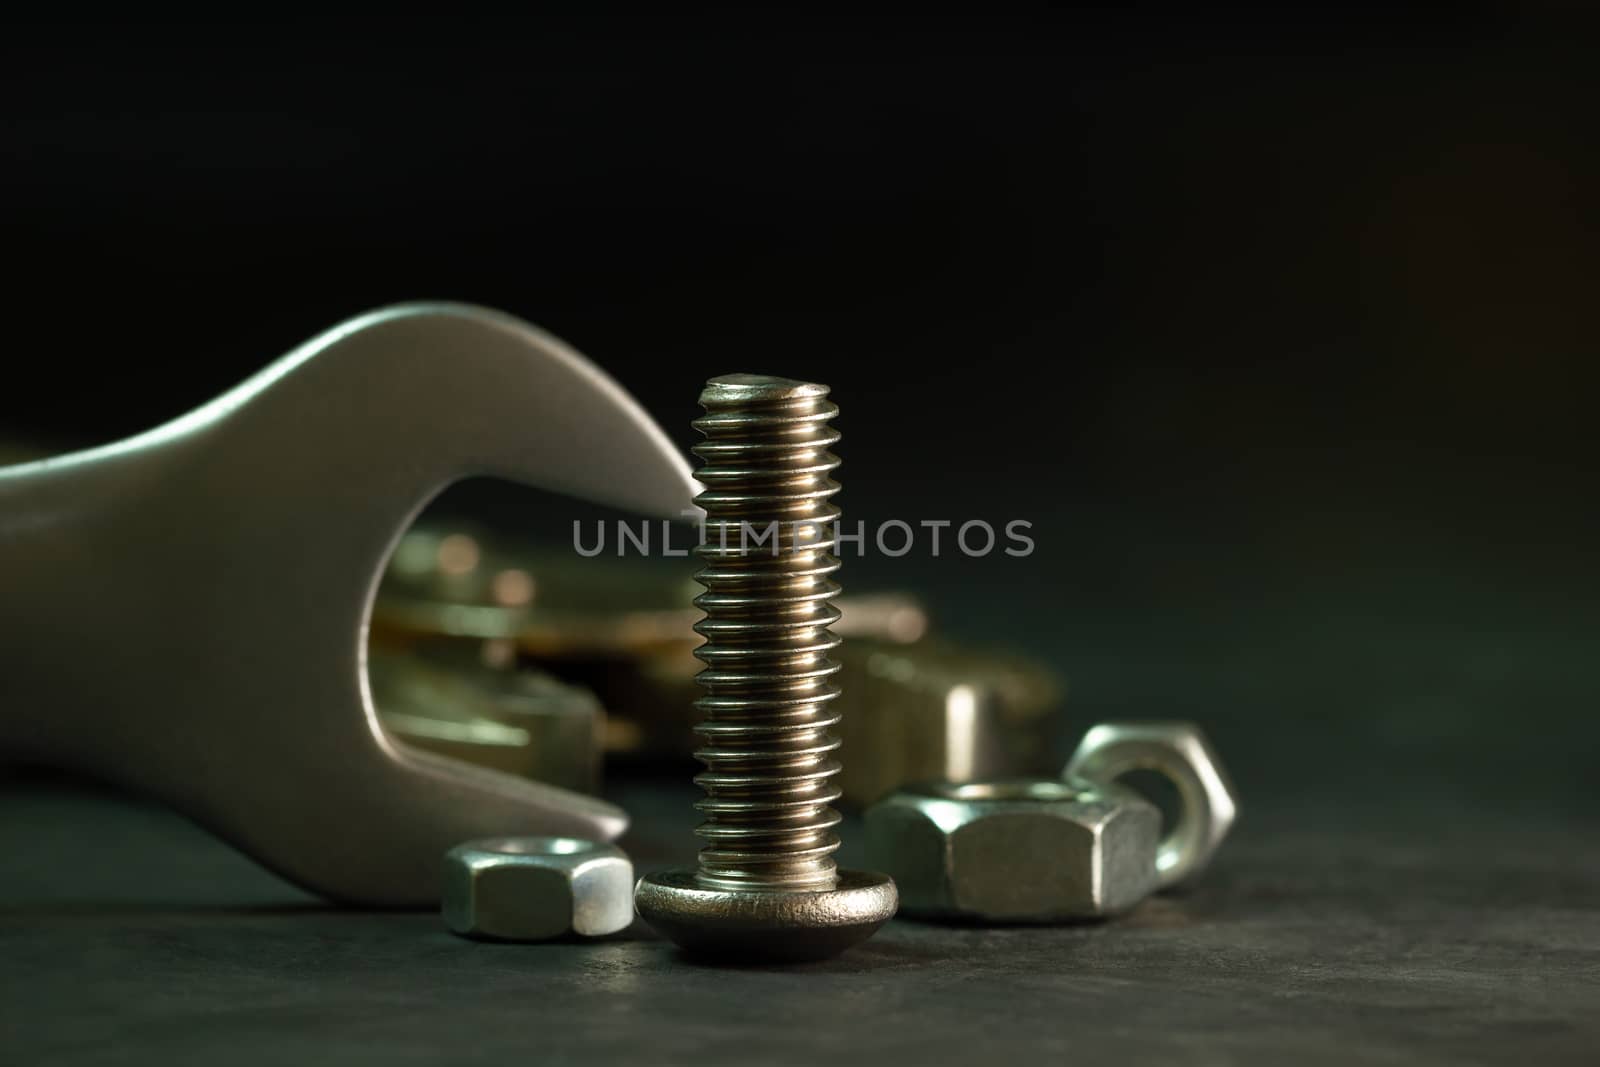 Bolt nuts and wrench on cement floor in darkness. Closeup and copy space for text. Concept of mechanical engineering jobs.